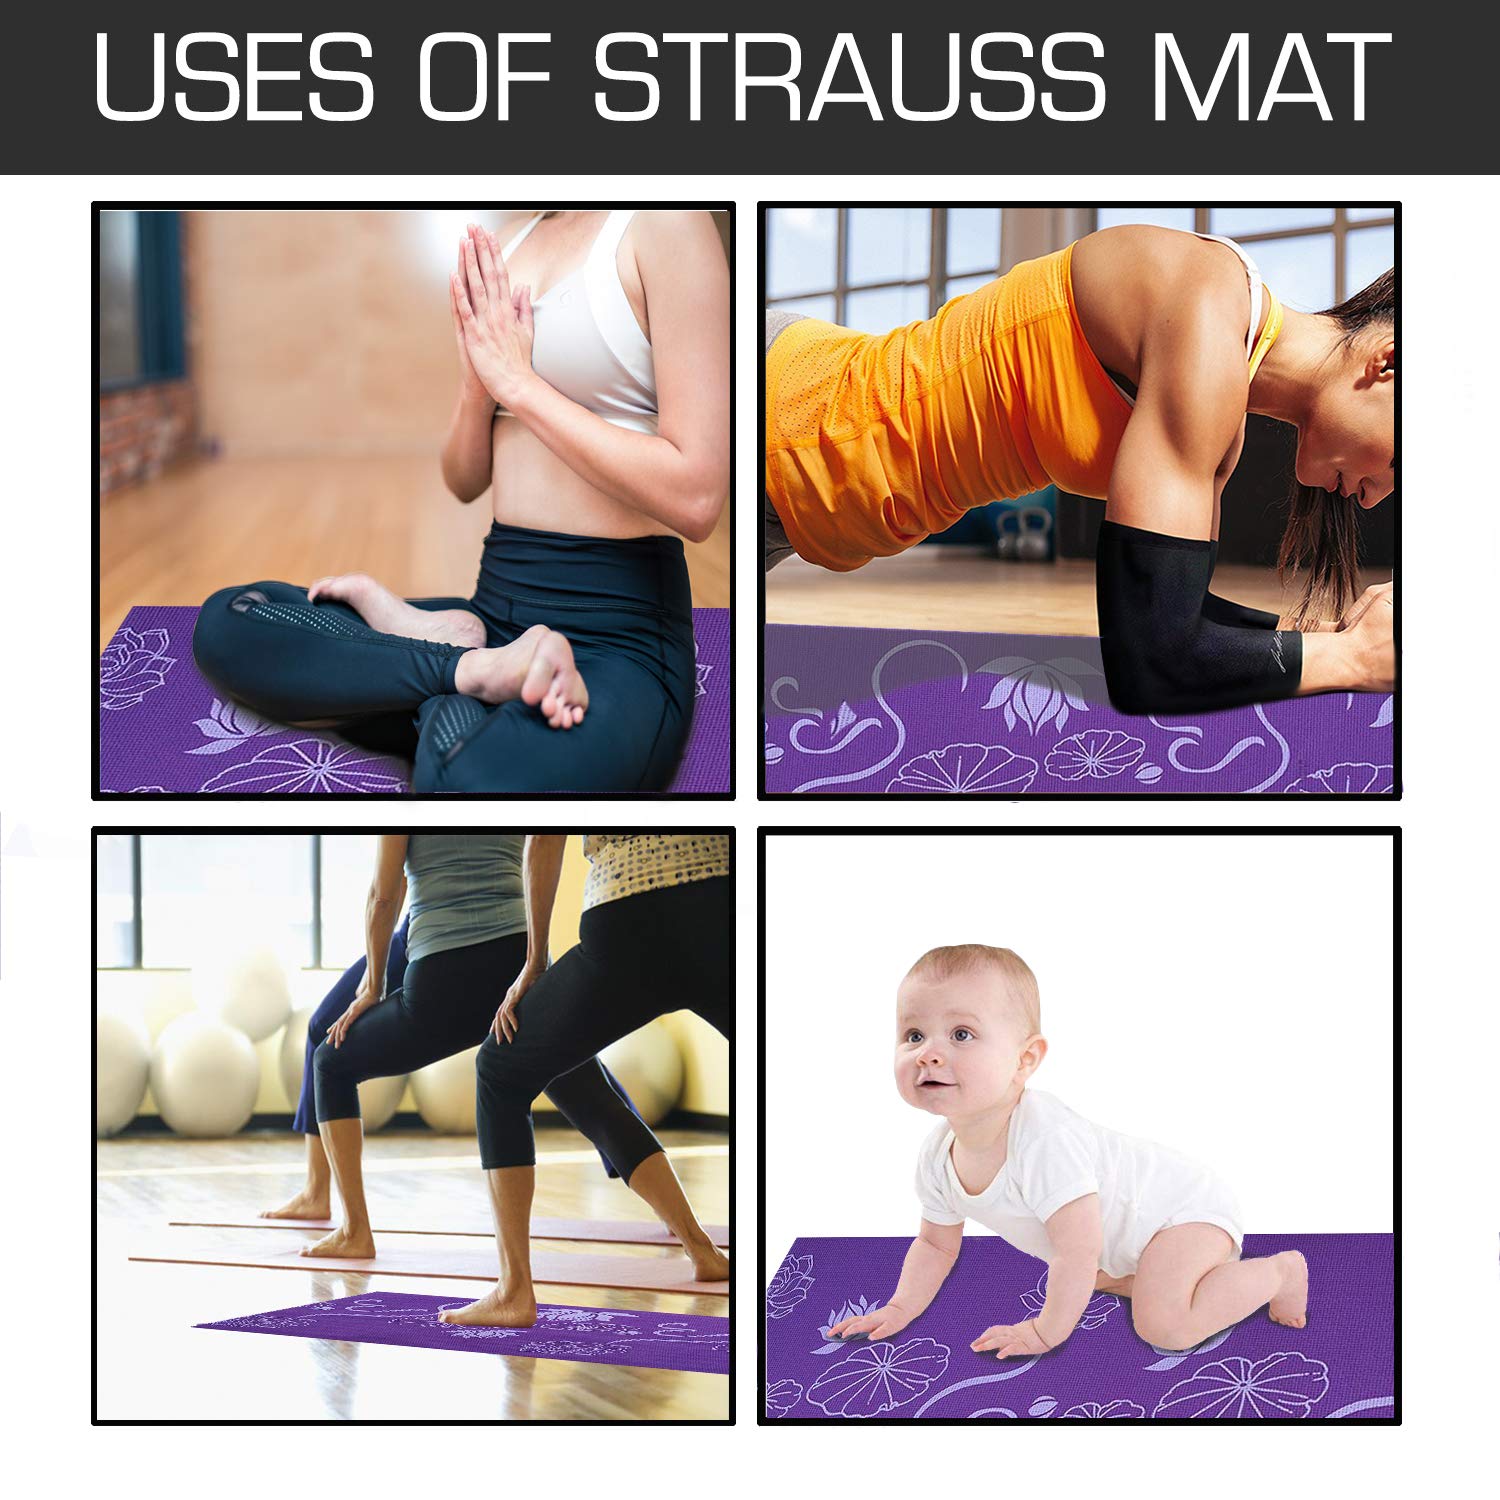 Strauss Yoga Mat, 6mm (Purple Floral) and Cooling Towel, 80 cm, (Purple)